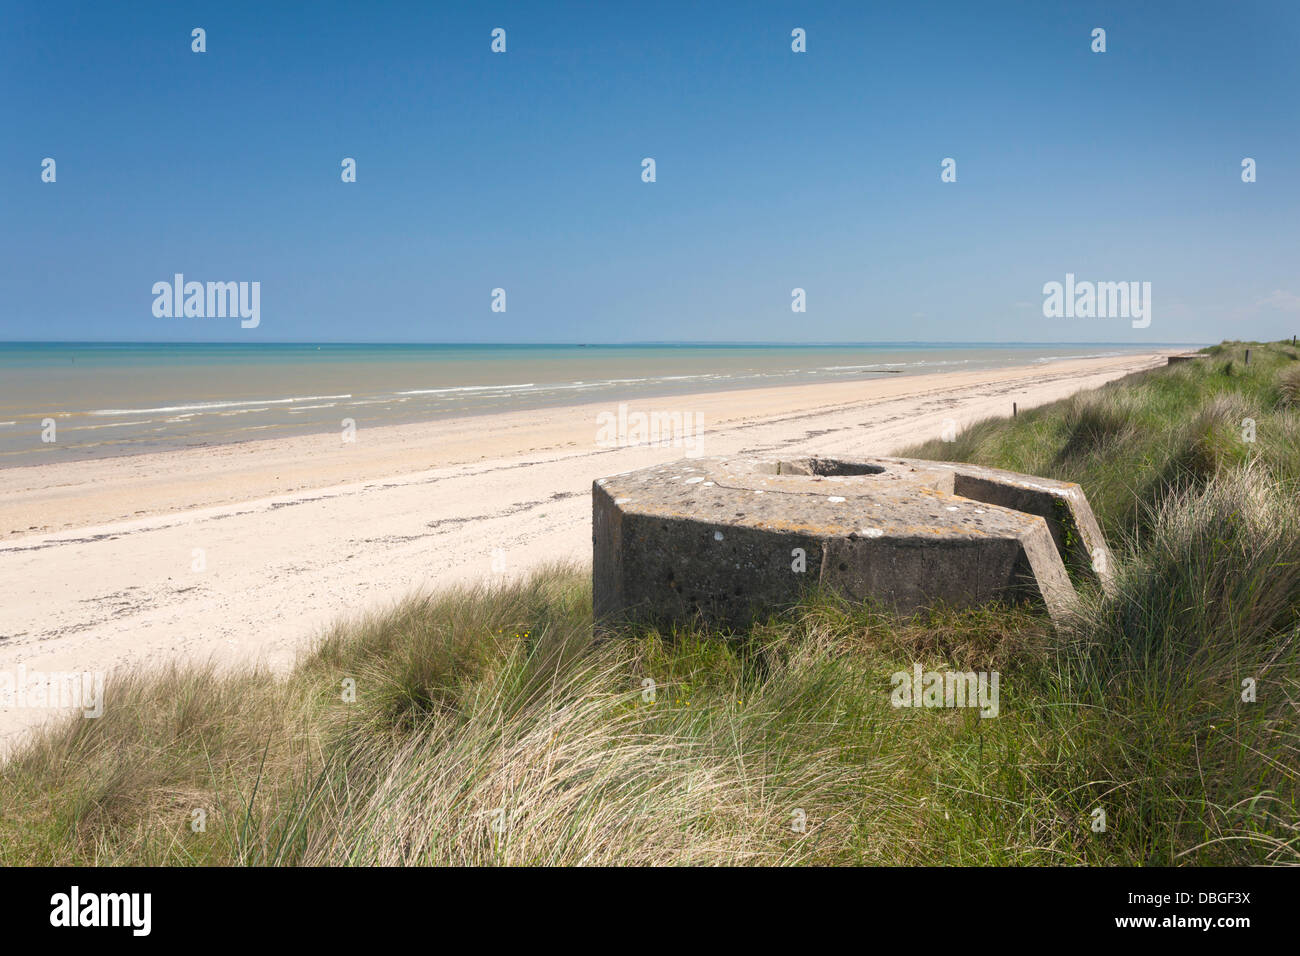 France, Normandy, D-Day Beaches Area, WWII D-Day invasion Utah Beach